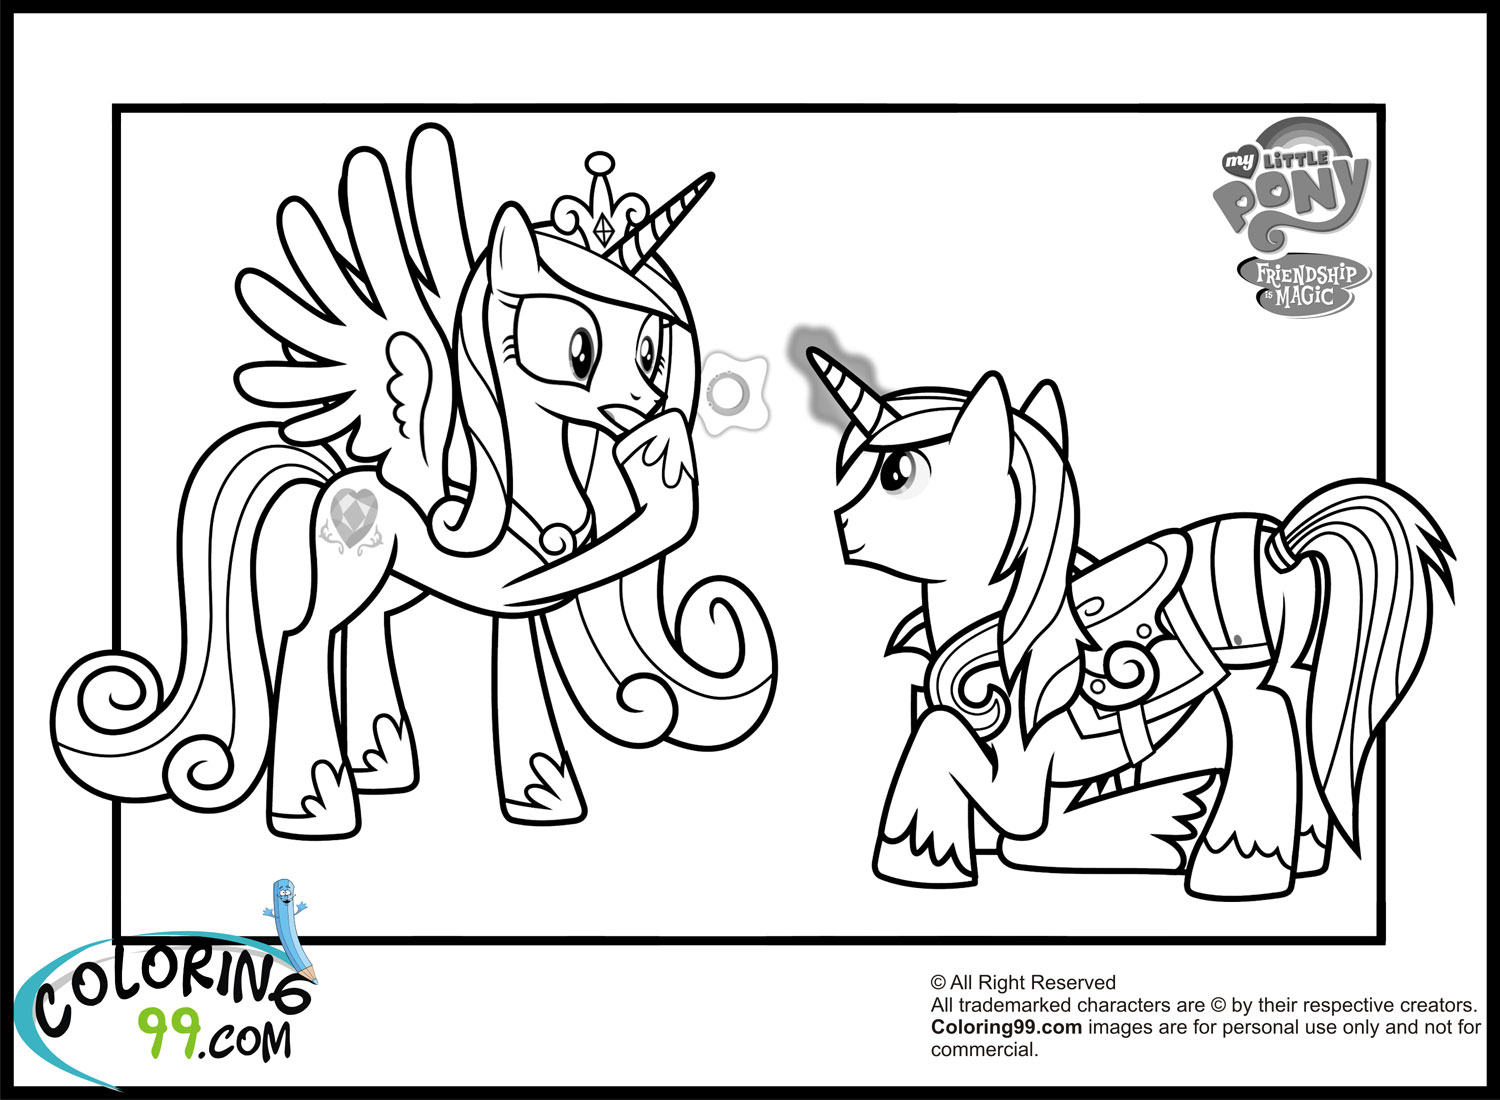 Shining armor coloring pages team colors